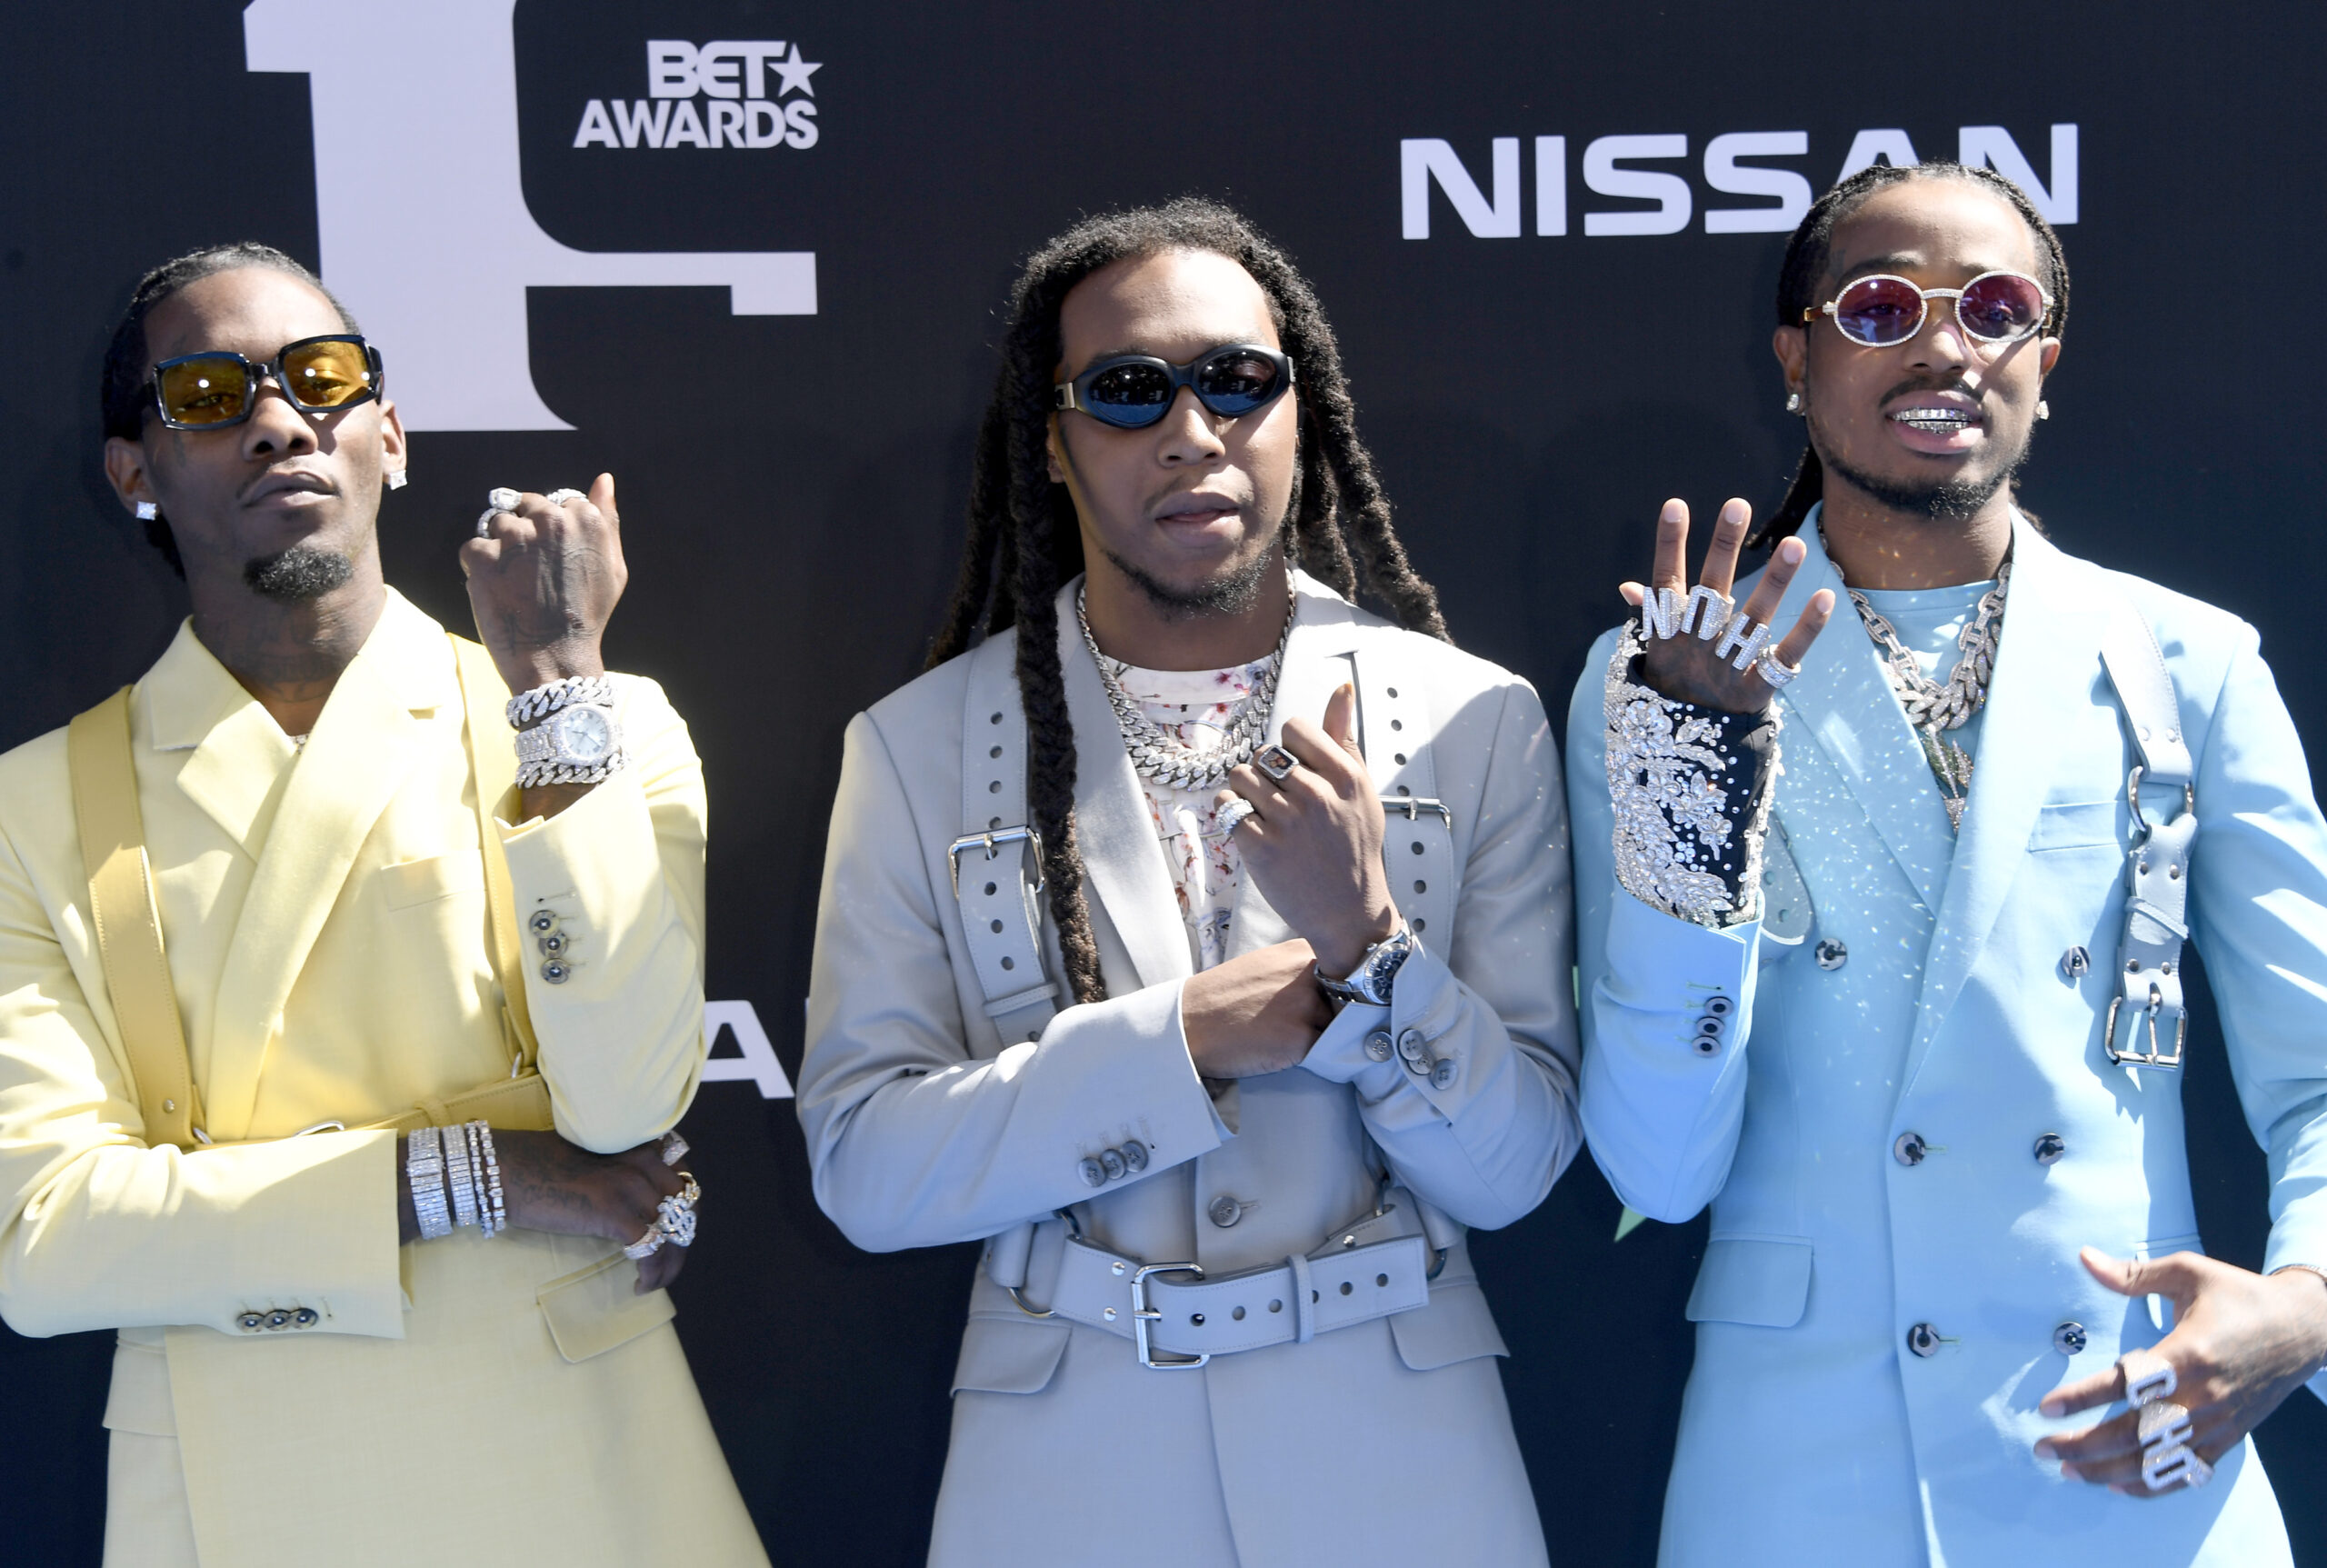 ‘Enough is Enough’, Clip of Takeoff Demanding His Flowers In Hip Hop Trends After His Death